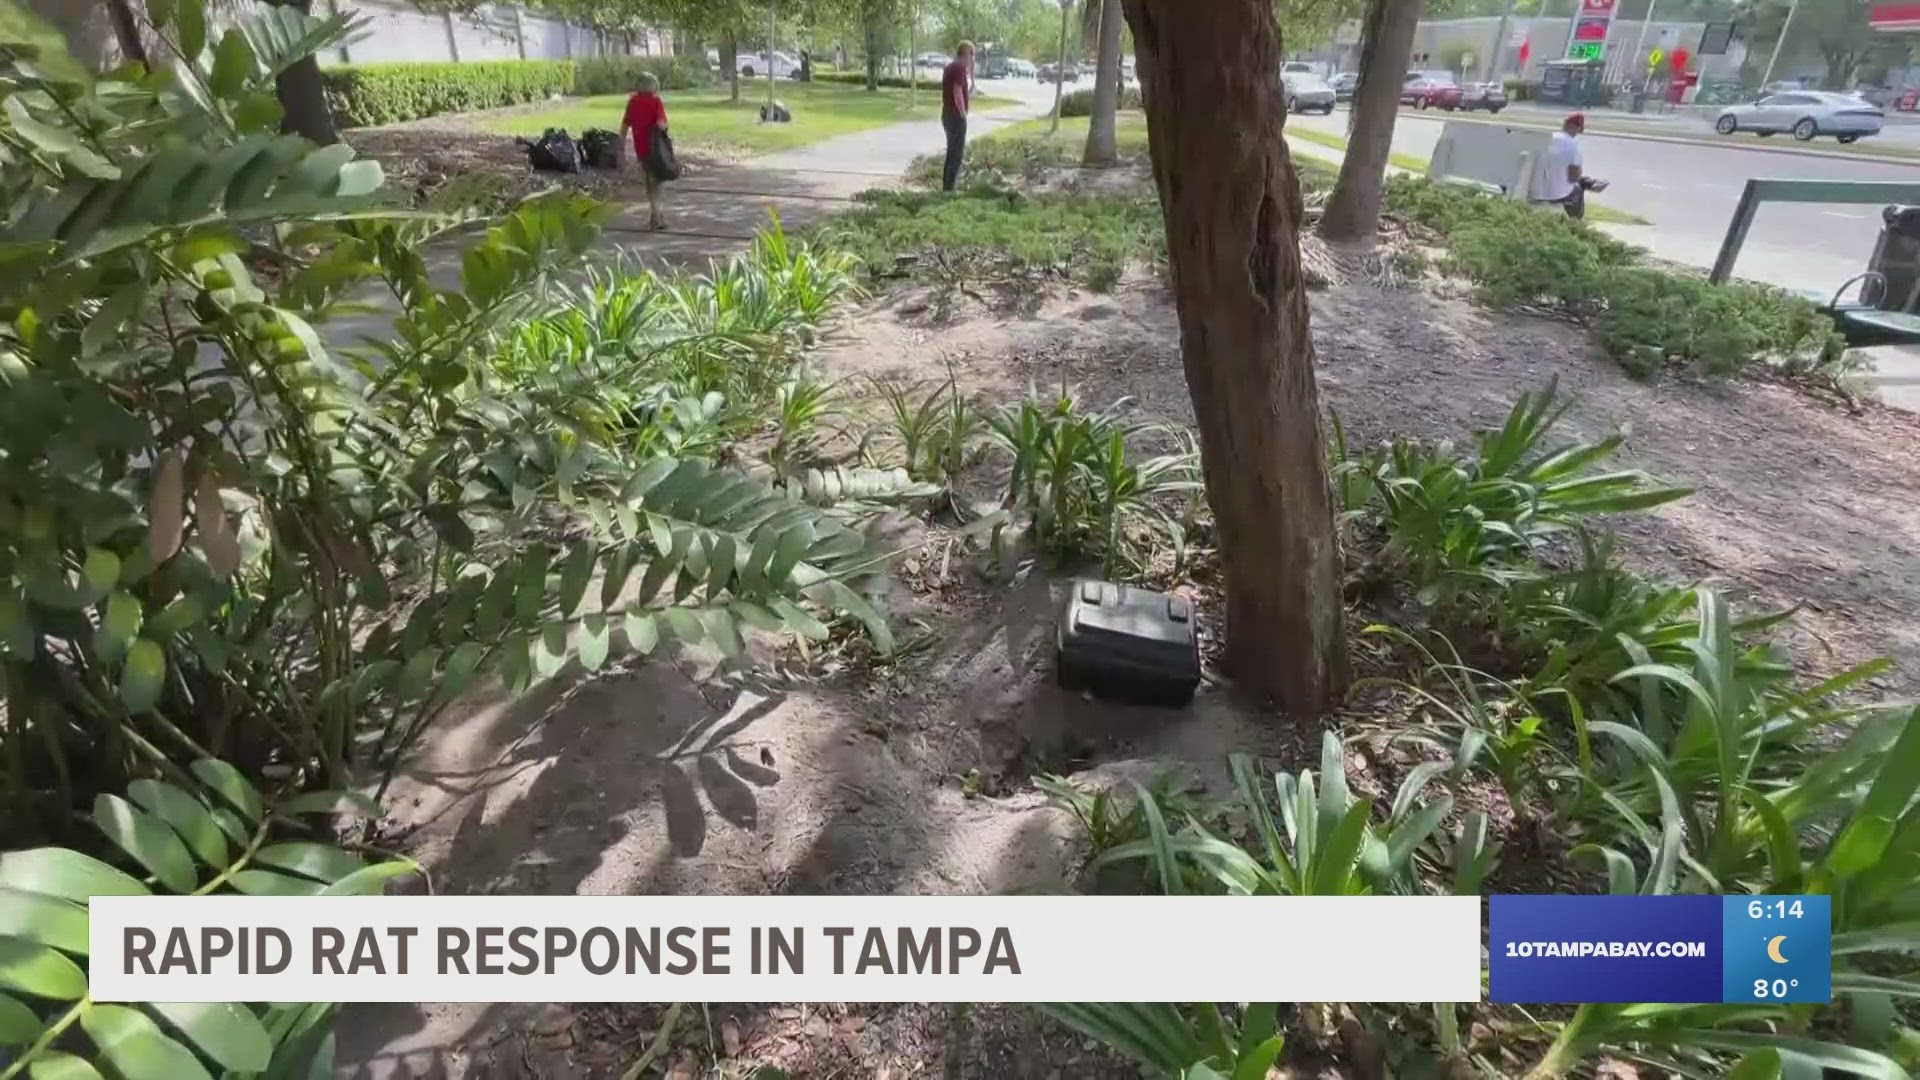 The City of Tampa estimates getting rid of the rats could take several weeks.